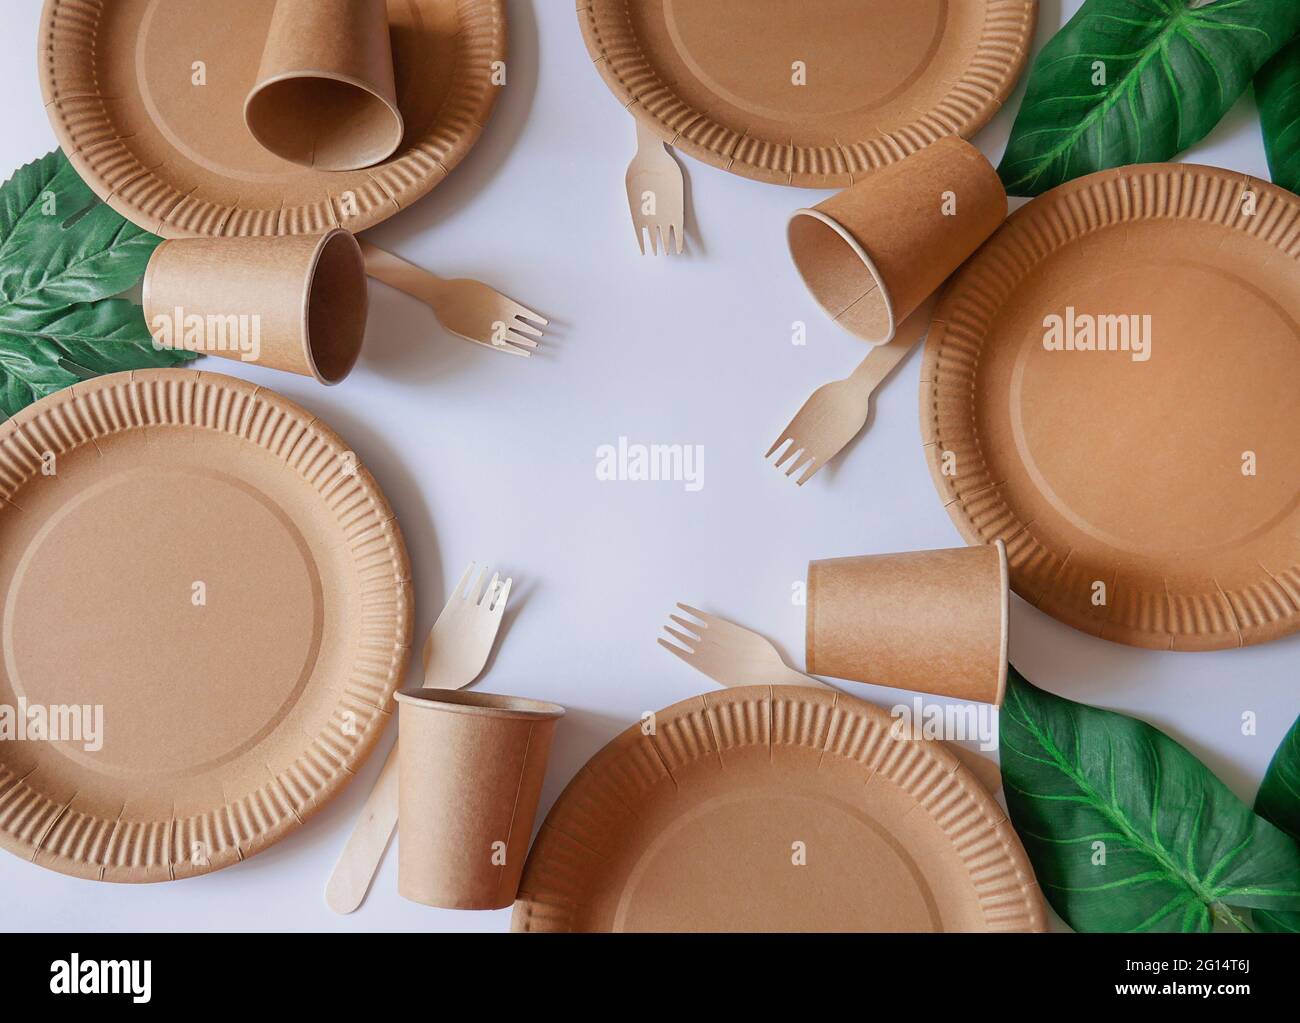 https://c8.alamy.com/comp/2G14T6J/eco-friendly-lifestyle-eco-craft-paper-tableware-plates-for-food-on-a-white-background-recycling-concept-is-environmentally-friendly-copy-space-2G14T6J.jpg